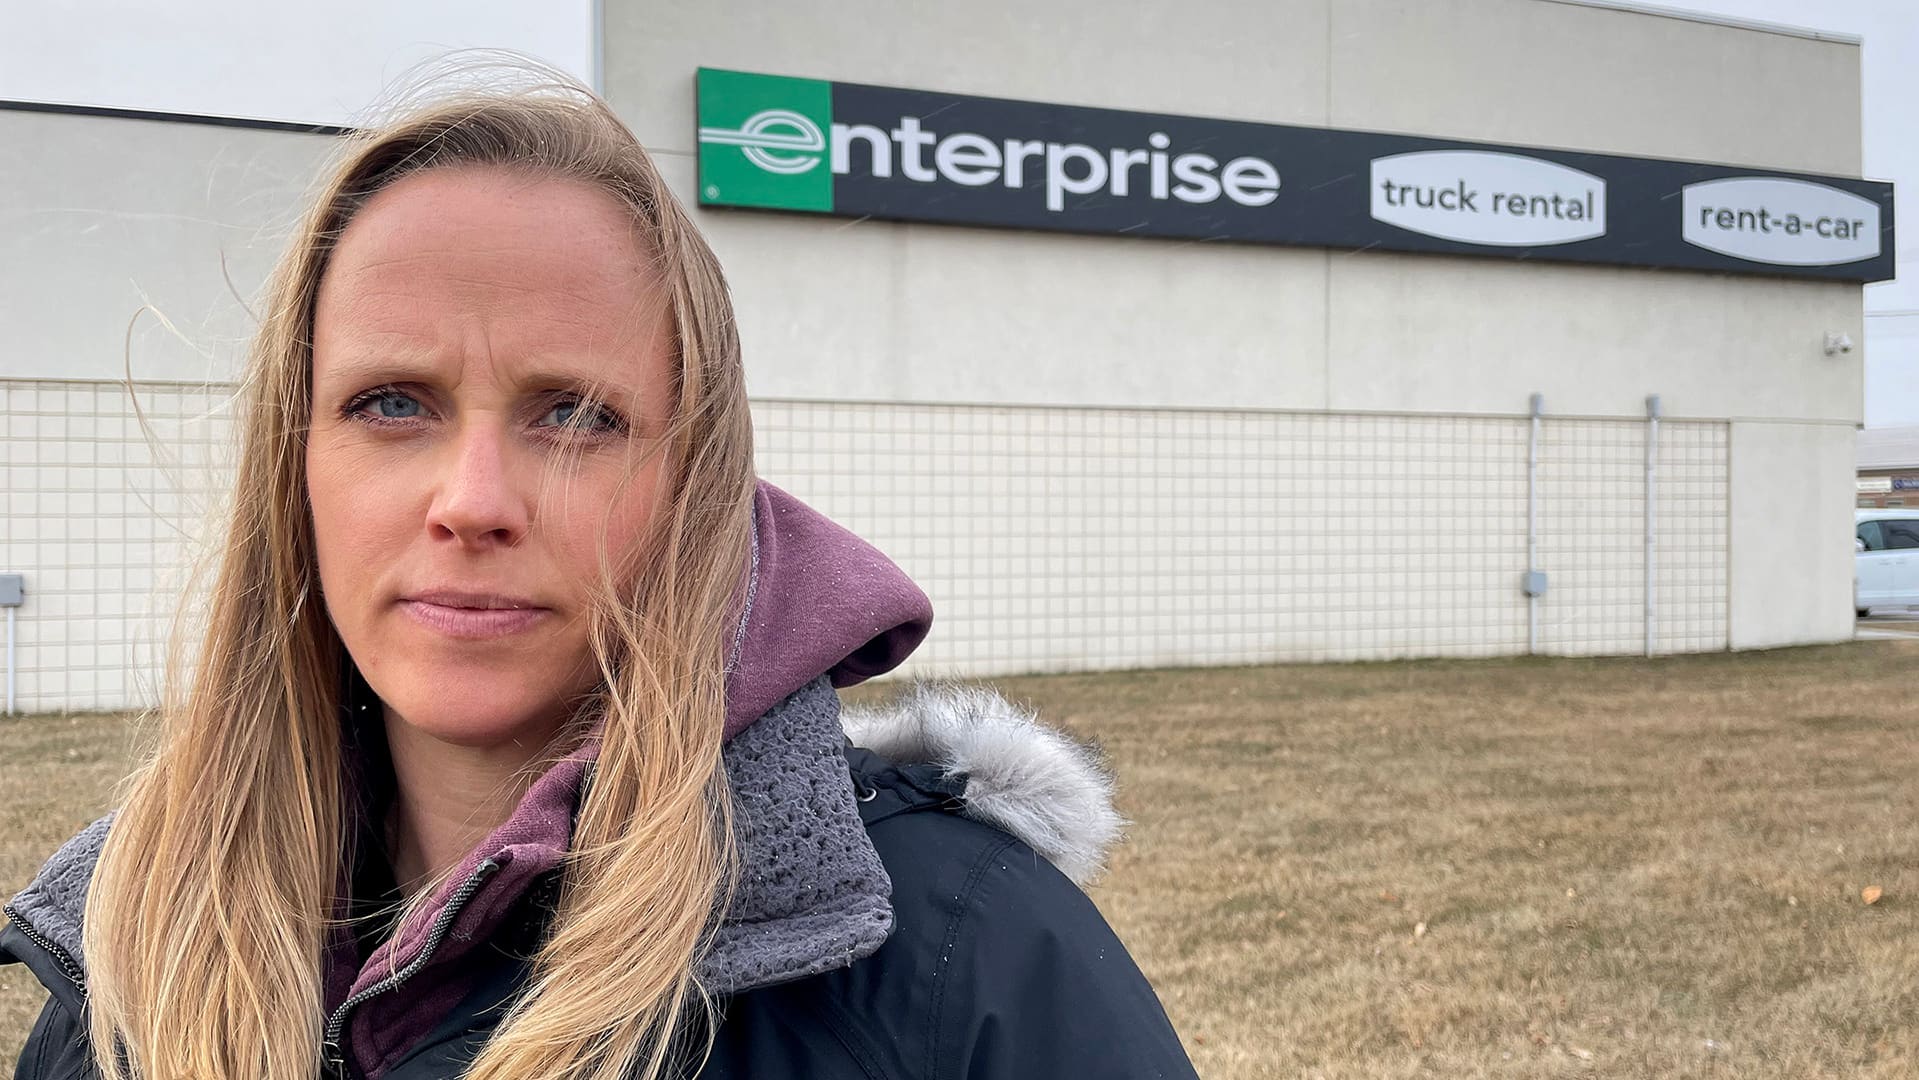 Enterprise dings woman who rented truck on sunny day more than $5,500 for hail damage